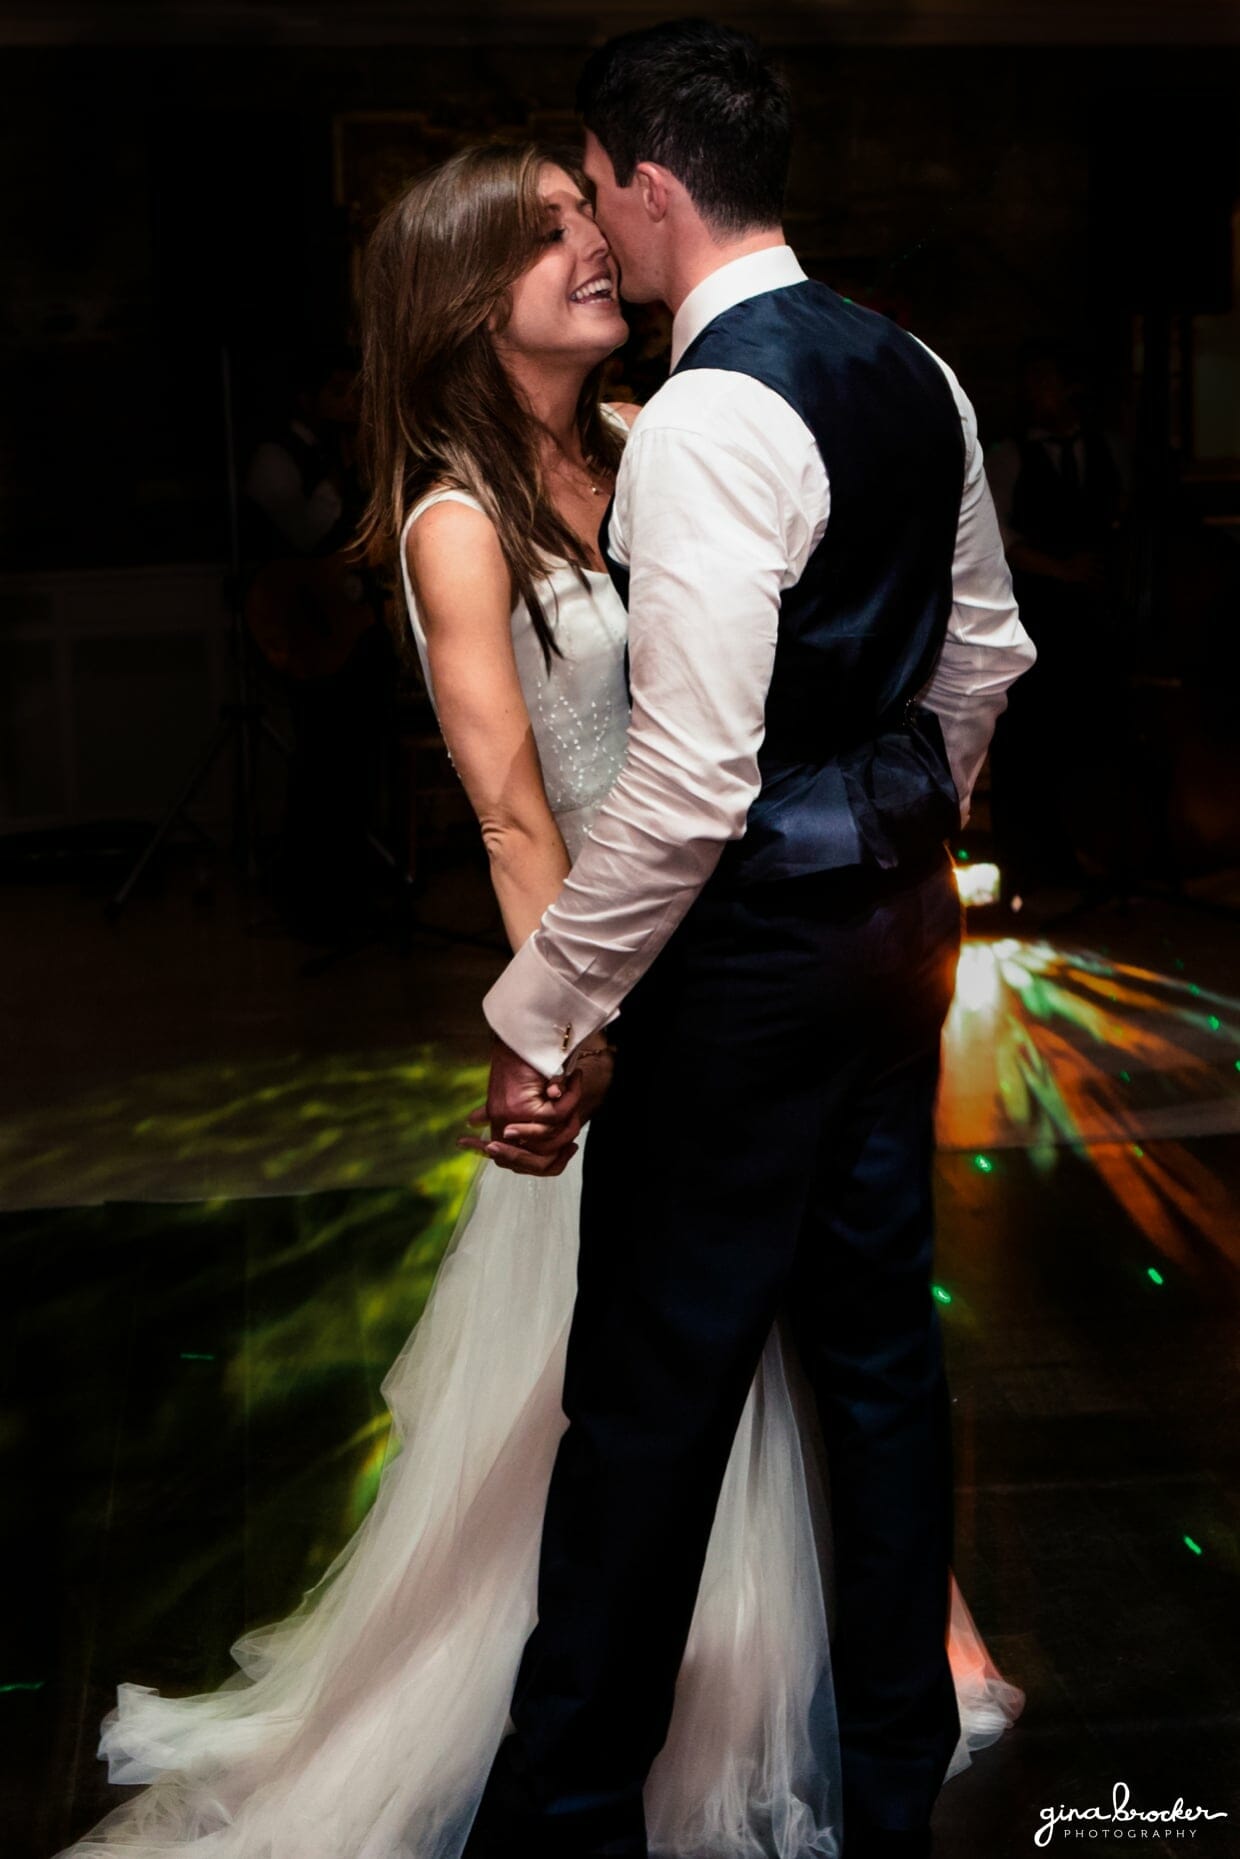 The bride and groom share a sweet moment during their first dance as husband and wife